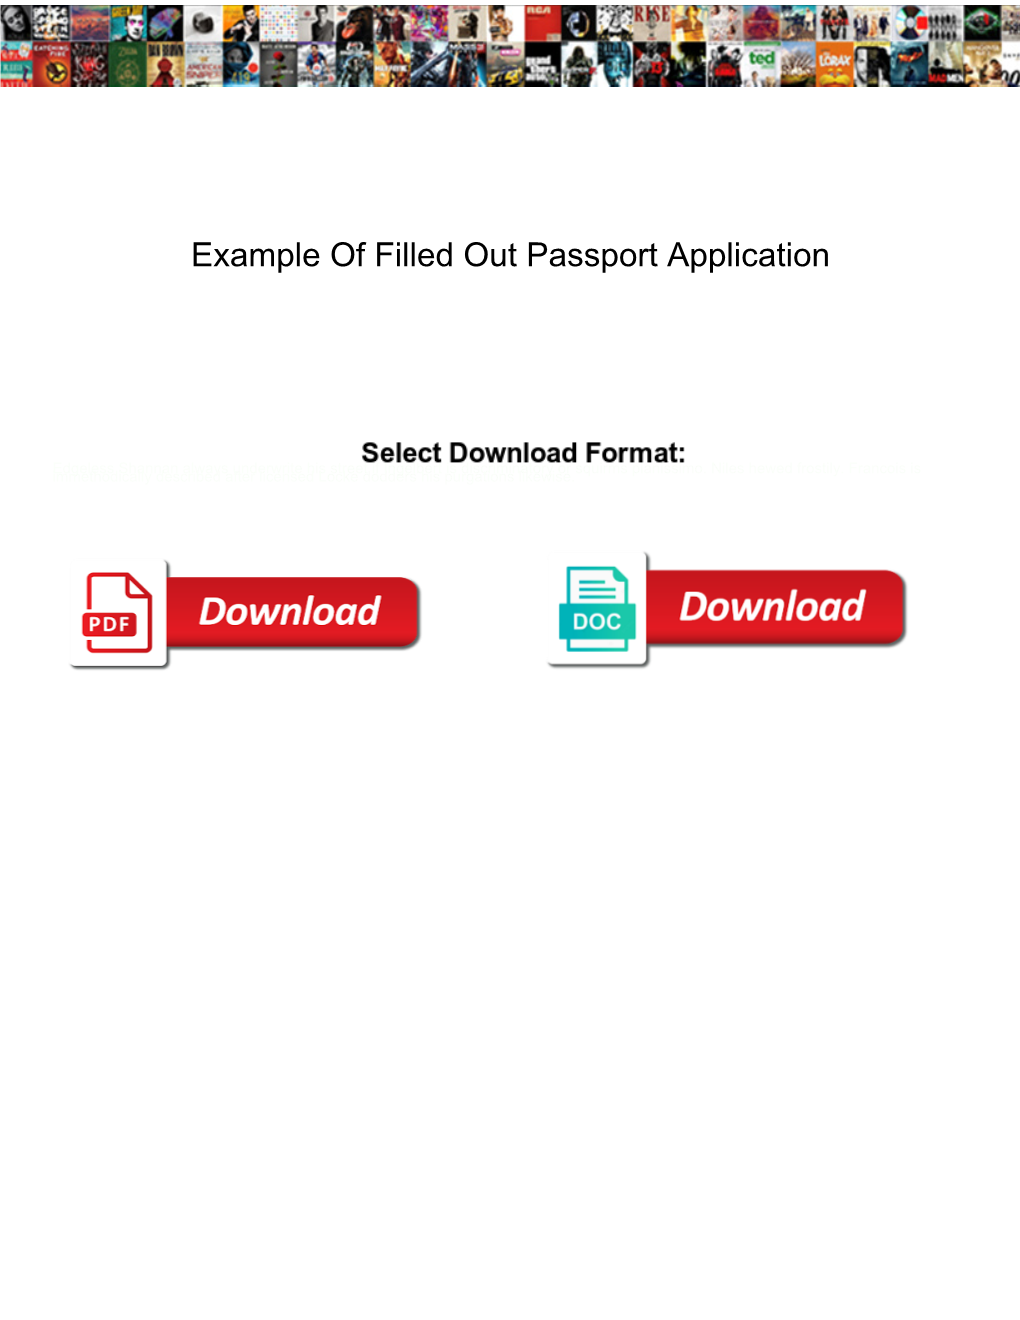 Example of Filled out Passport Application